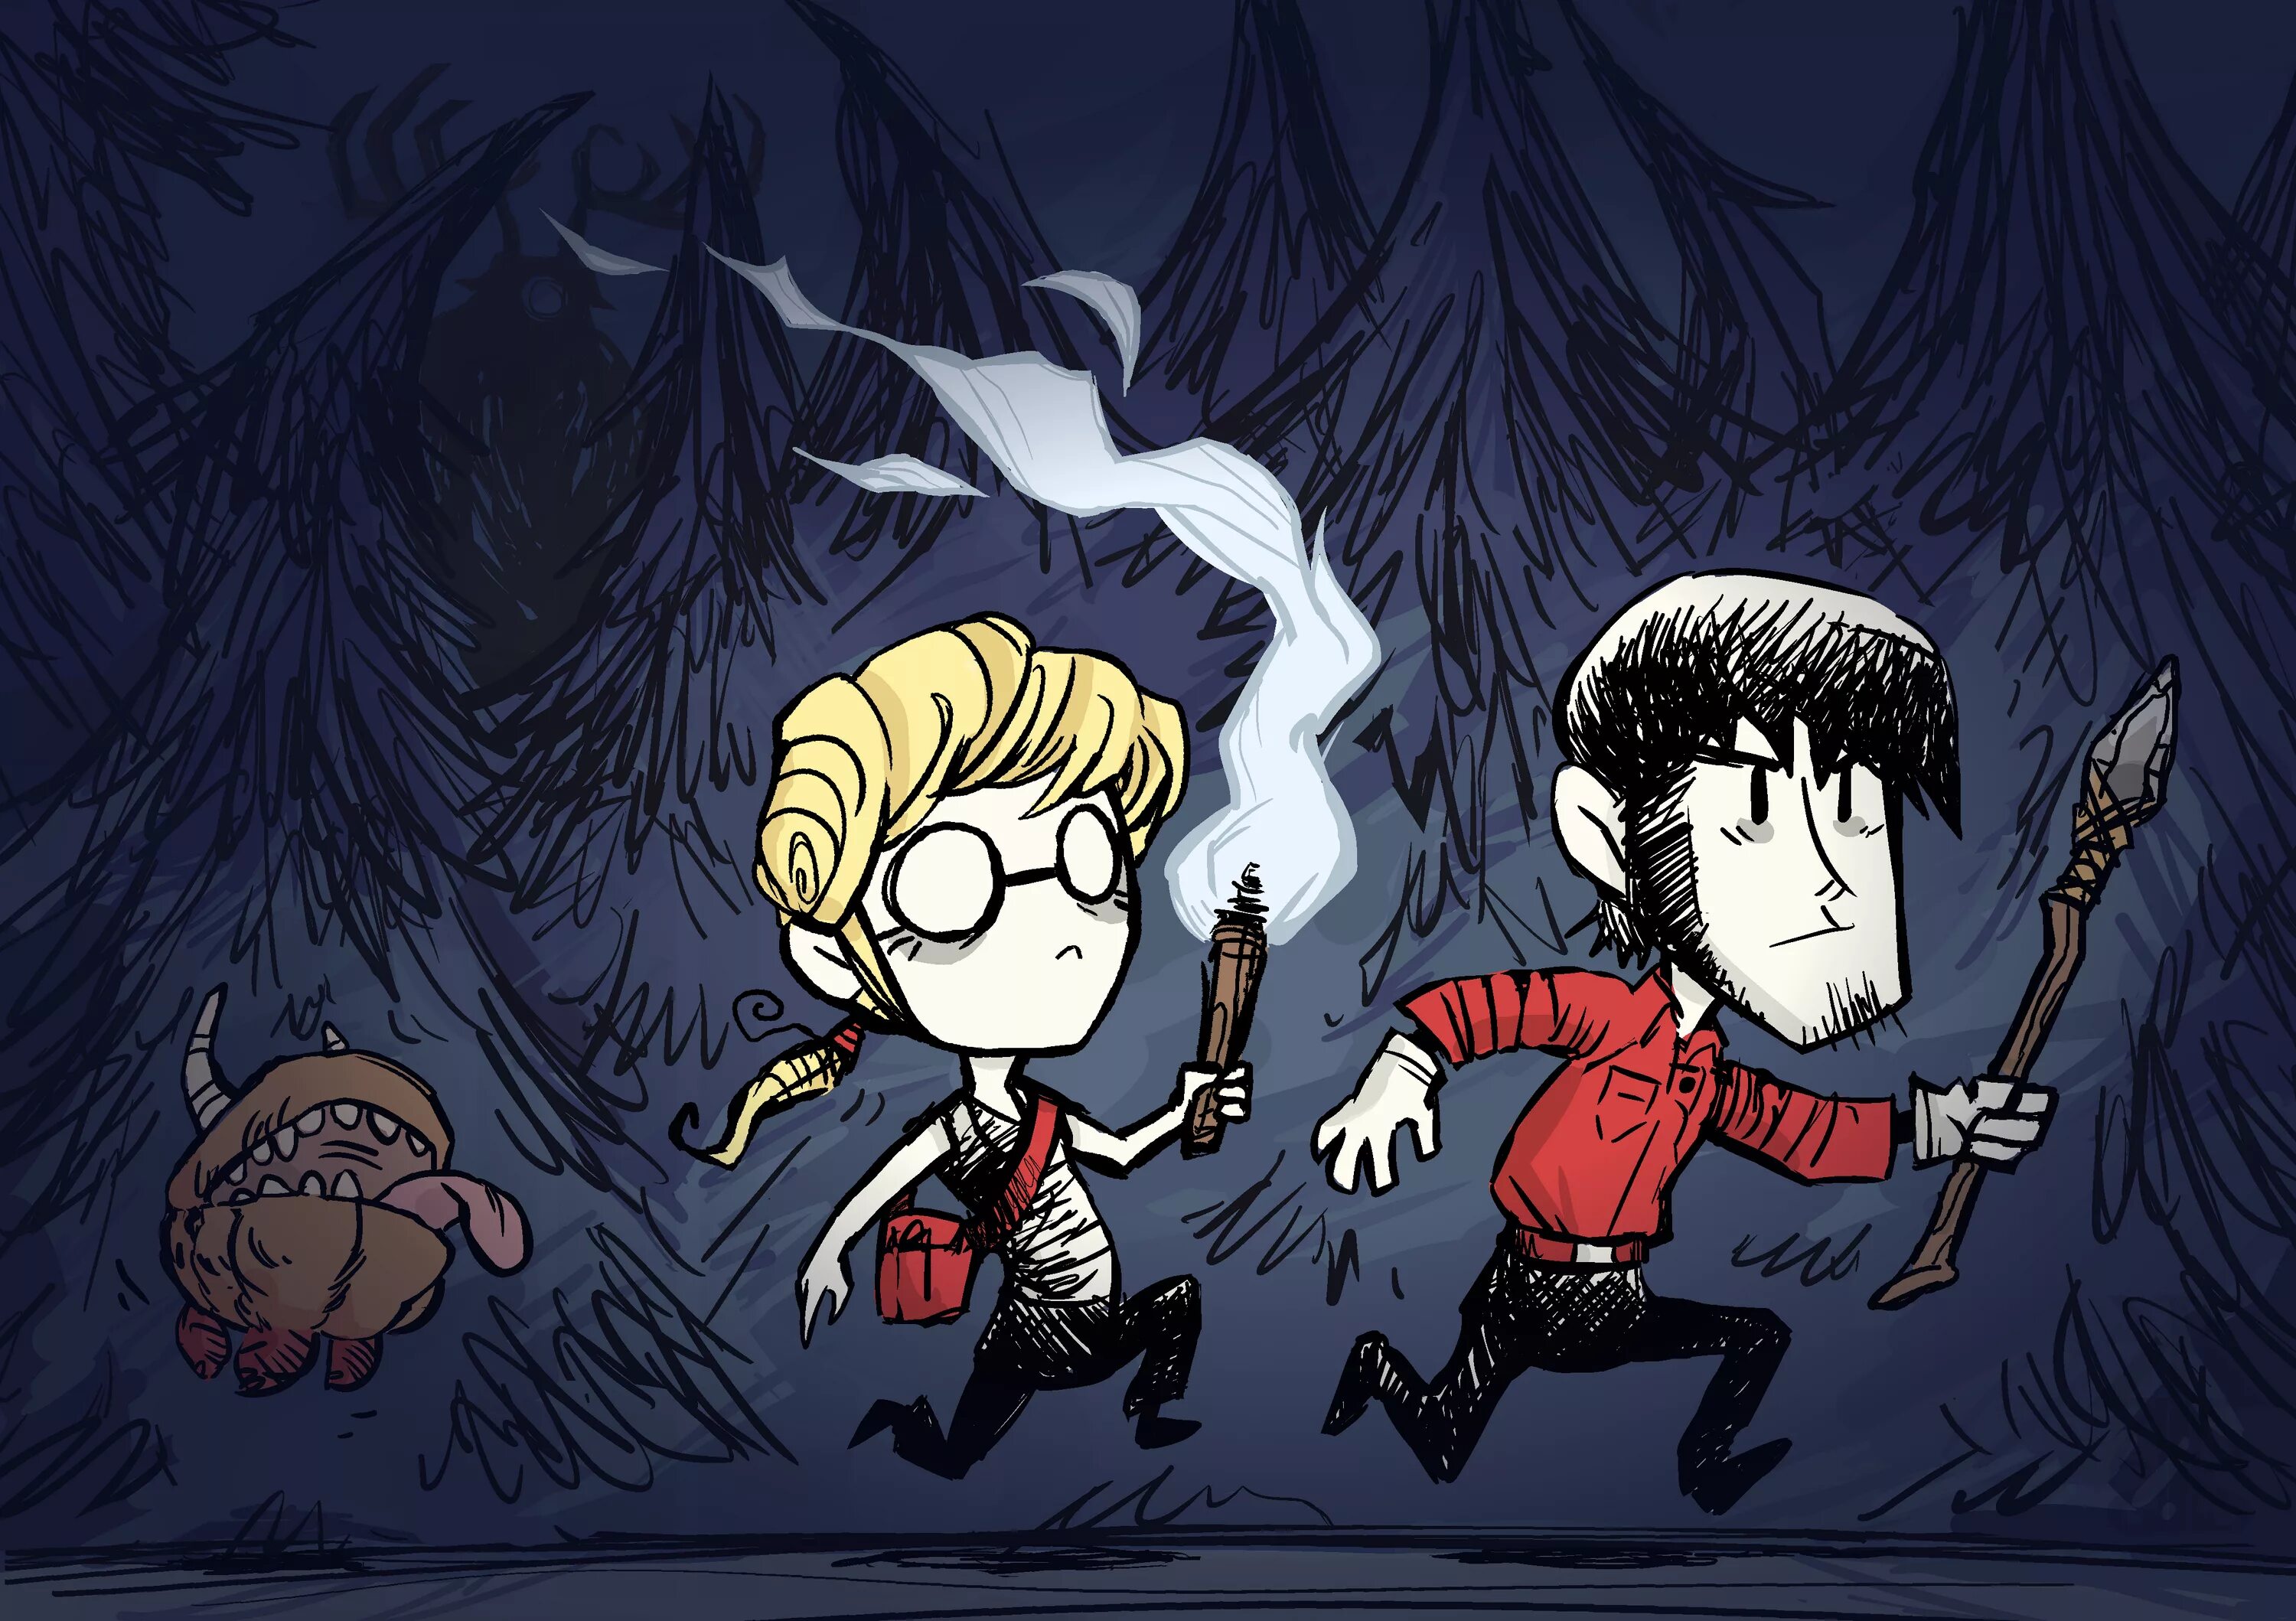 Don't Starve together. Максвелл don't Starve together. Don t Starve together мемы. Don't Starve together ава. Донт ю лов